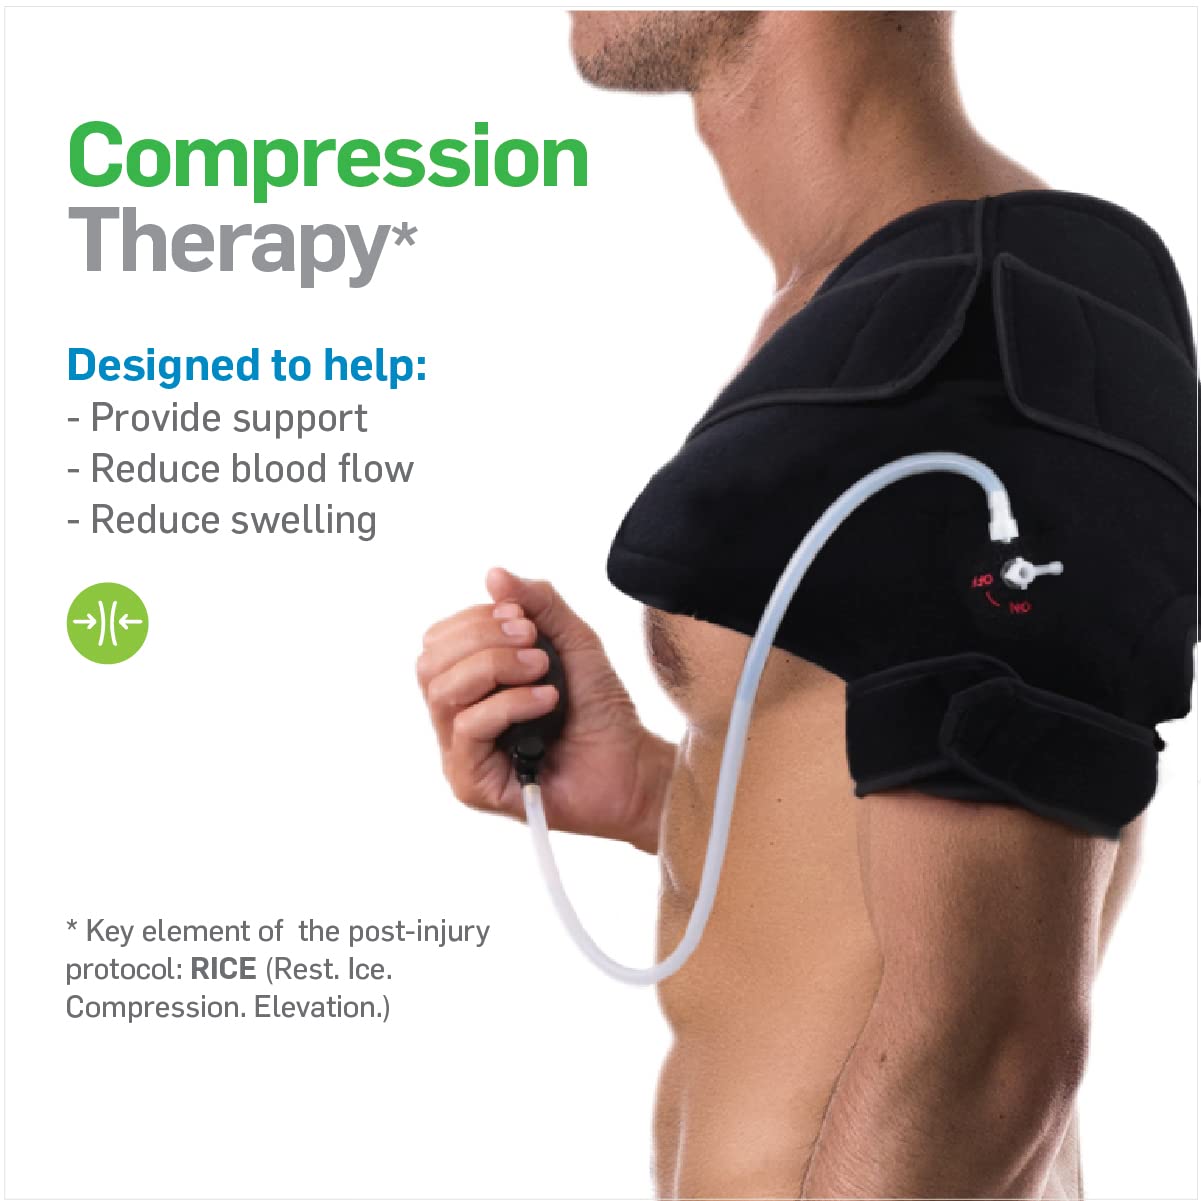 Advanced Cold or Hot Shoulder Ice Pack Wrap, Compression Shoulder Brace for Pain Relief - Cool or Heating Pad for Rotator Cuff Injuries, Football, Baseball, Volleyball, Basketball, Softball